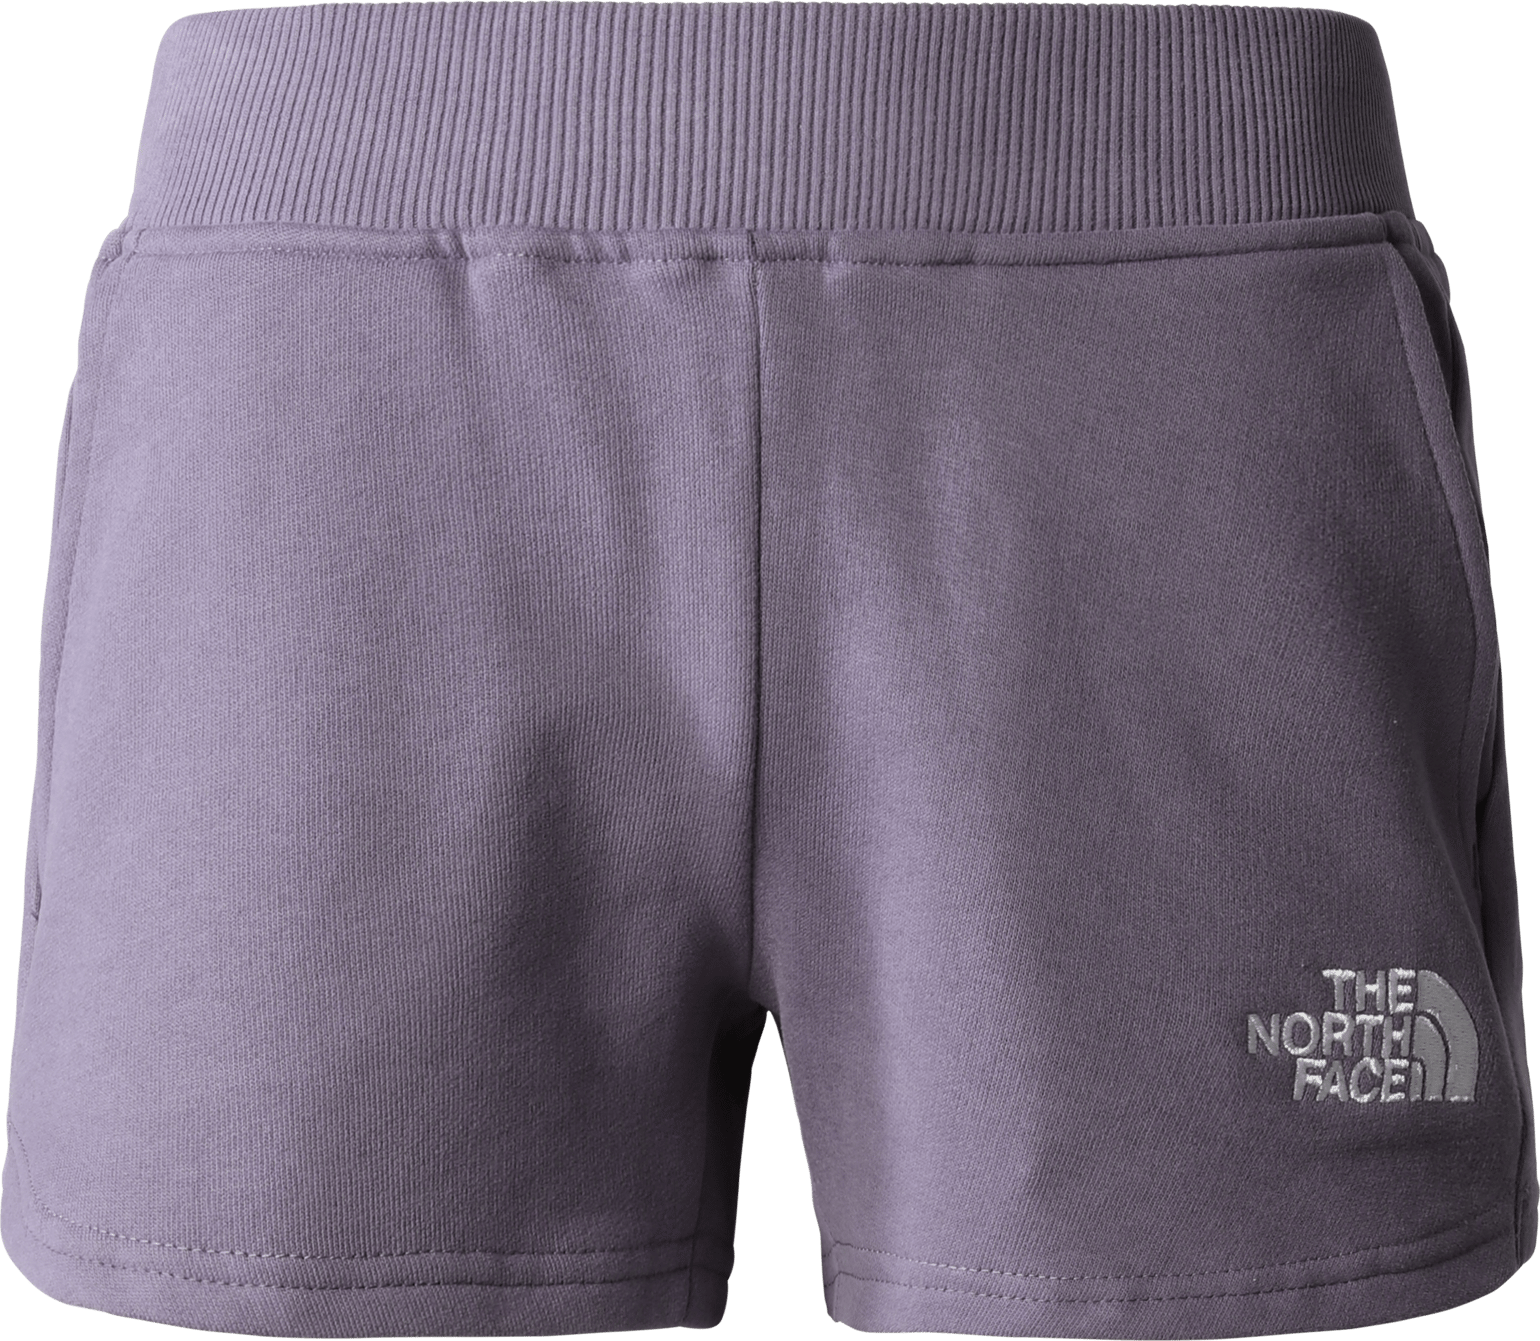 The North Face Girls' Cotton Shorts Lunar Slate